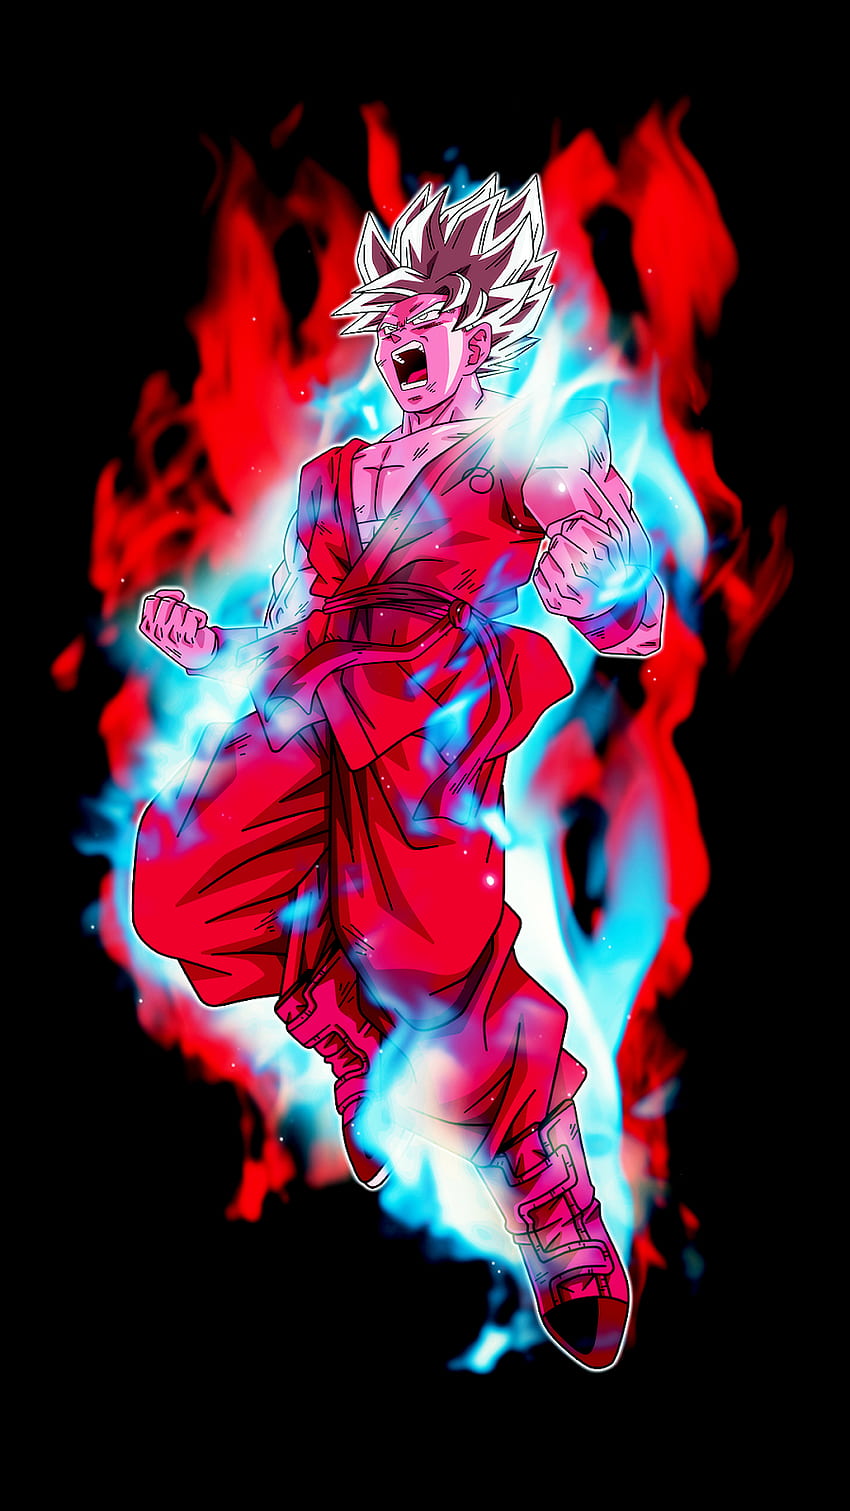 My Collection Of Amoled Background - Part II Dragon Ball, Black AMOLED Dragon Ball HD phone wallpaper